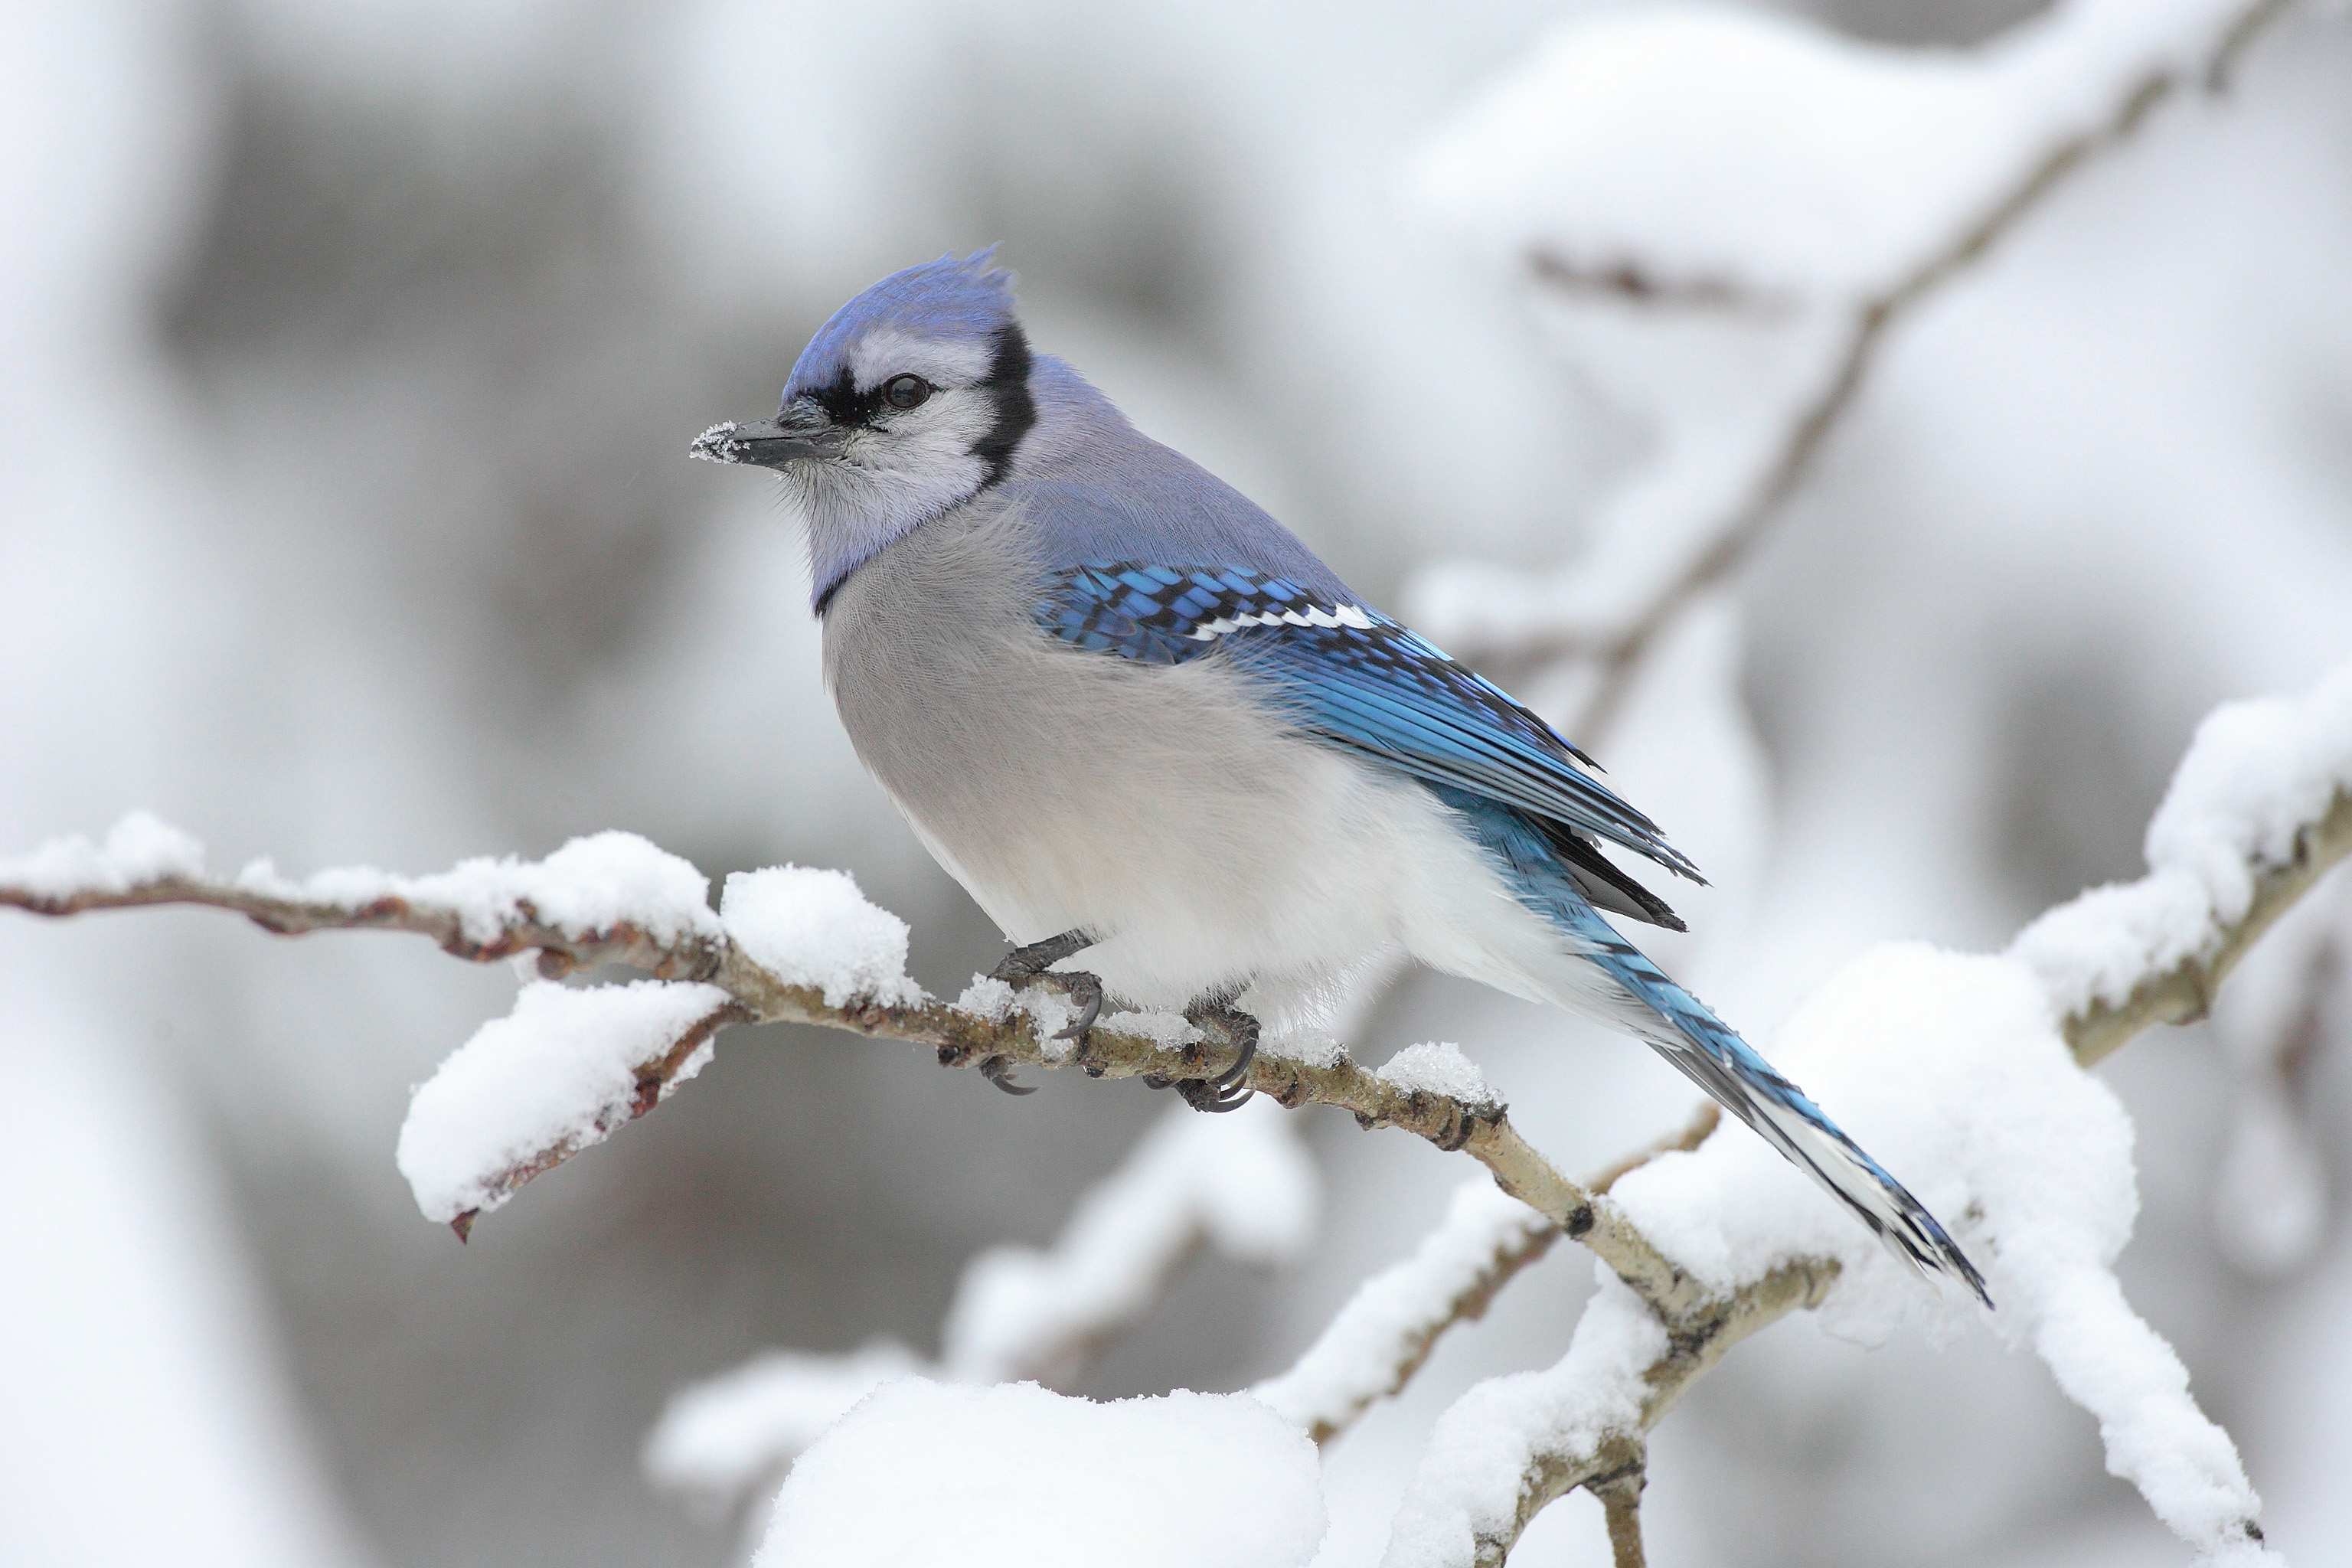 A Blue Jay (Cyanocitta cristata) in Algonquin Provincial Park in Canada by Mdf